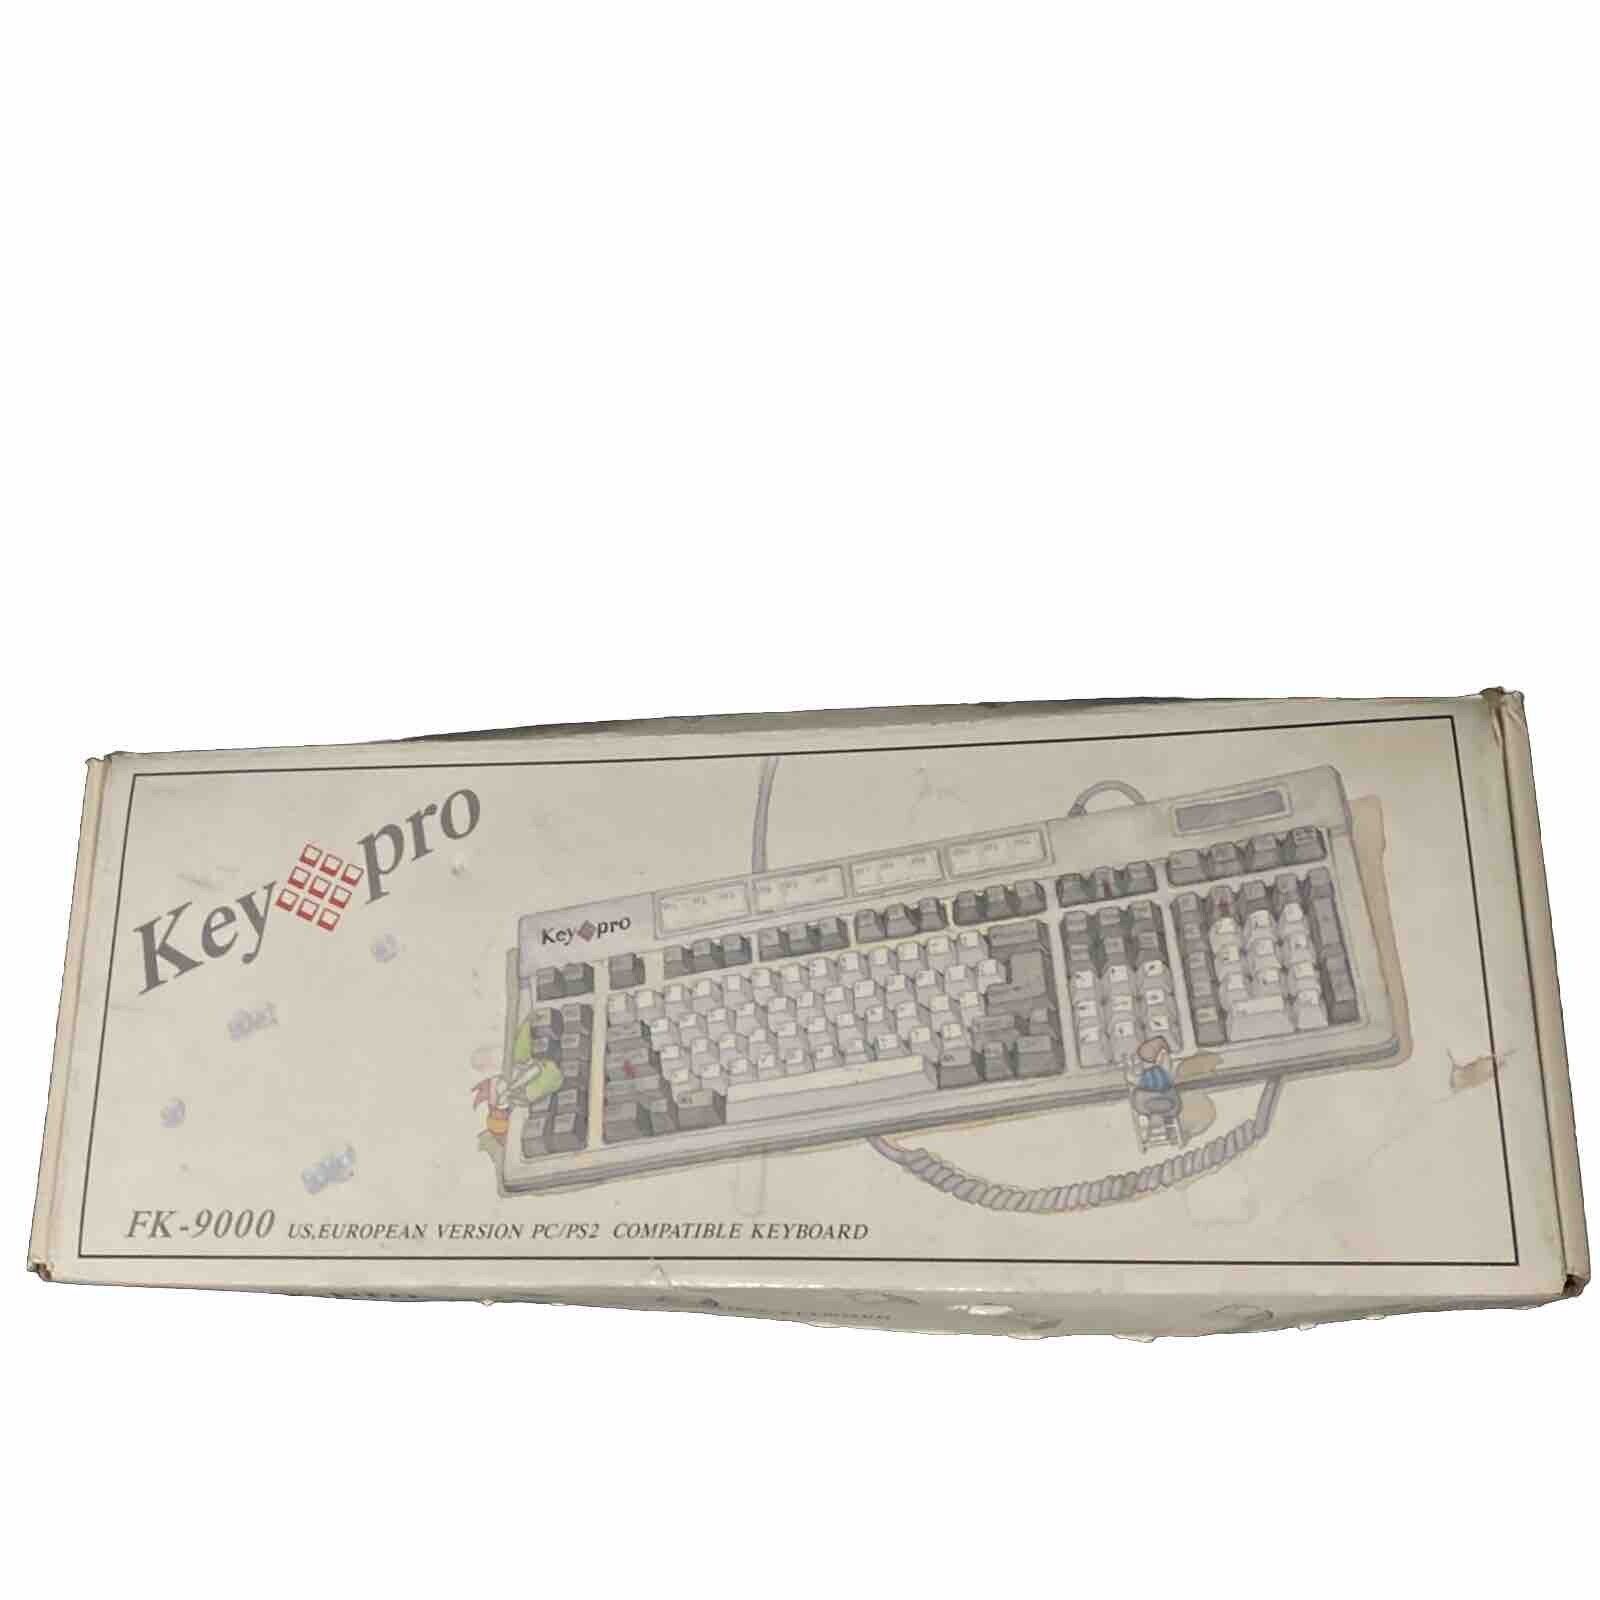 Vintage KEYPRO FK-9000 Computer Keyboard IBM PC/XT / PS 2 Compatible In Box